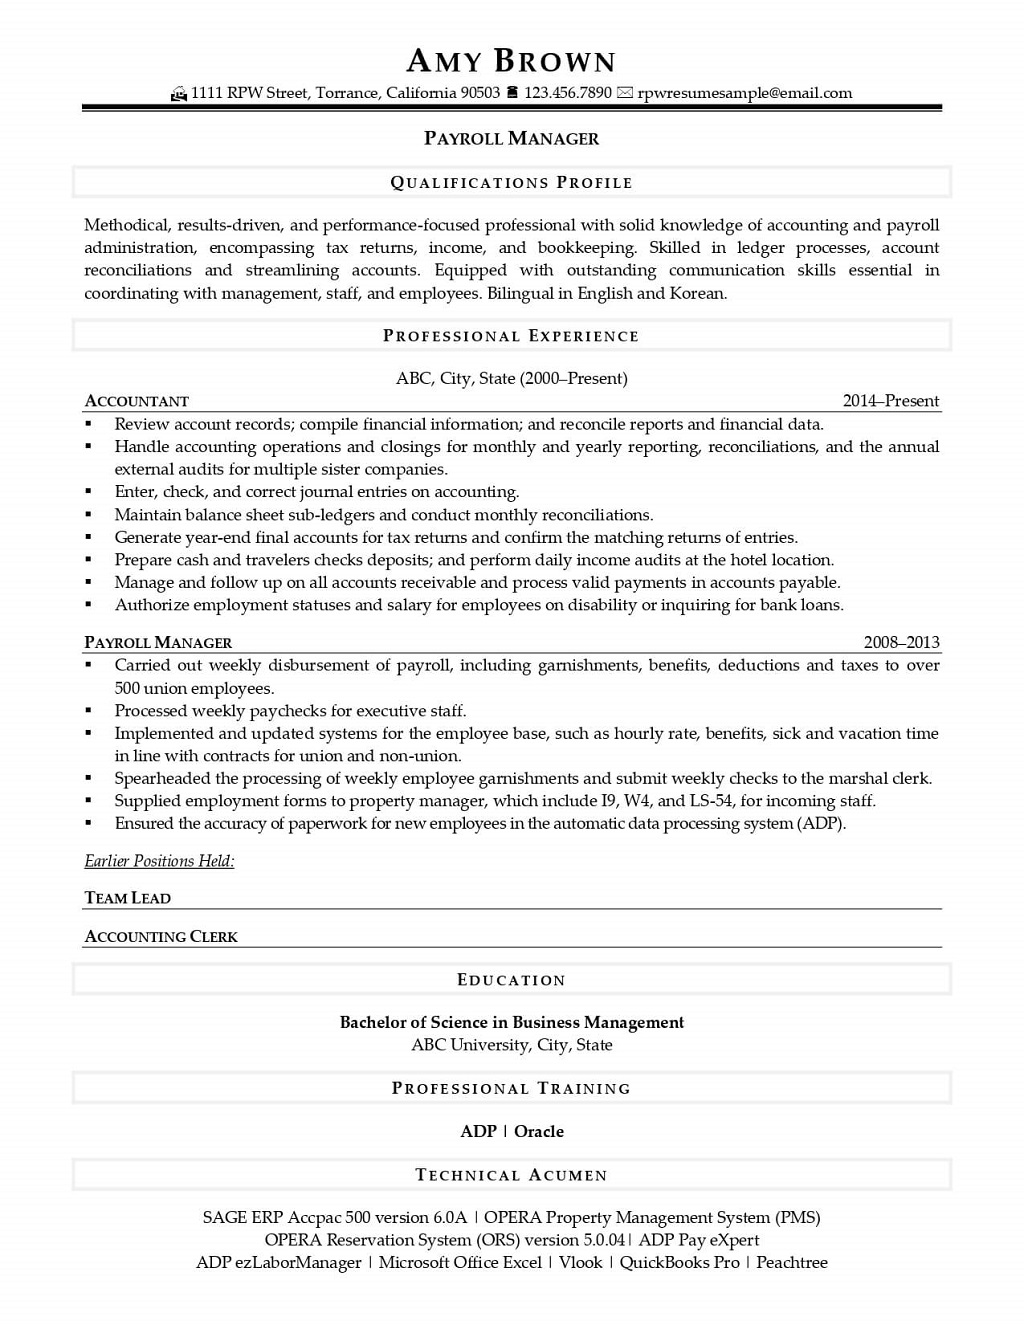 Payroll Manager Resume Example